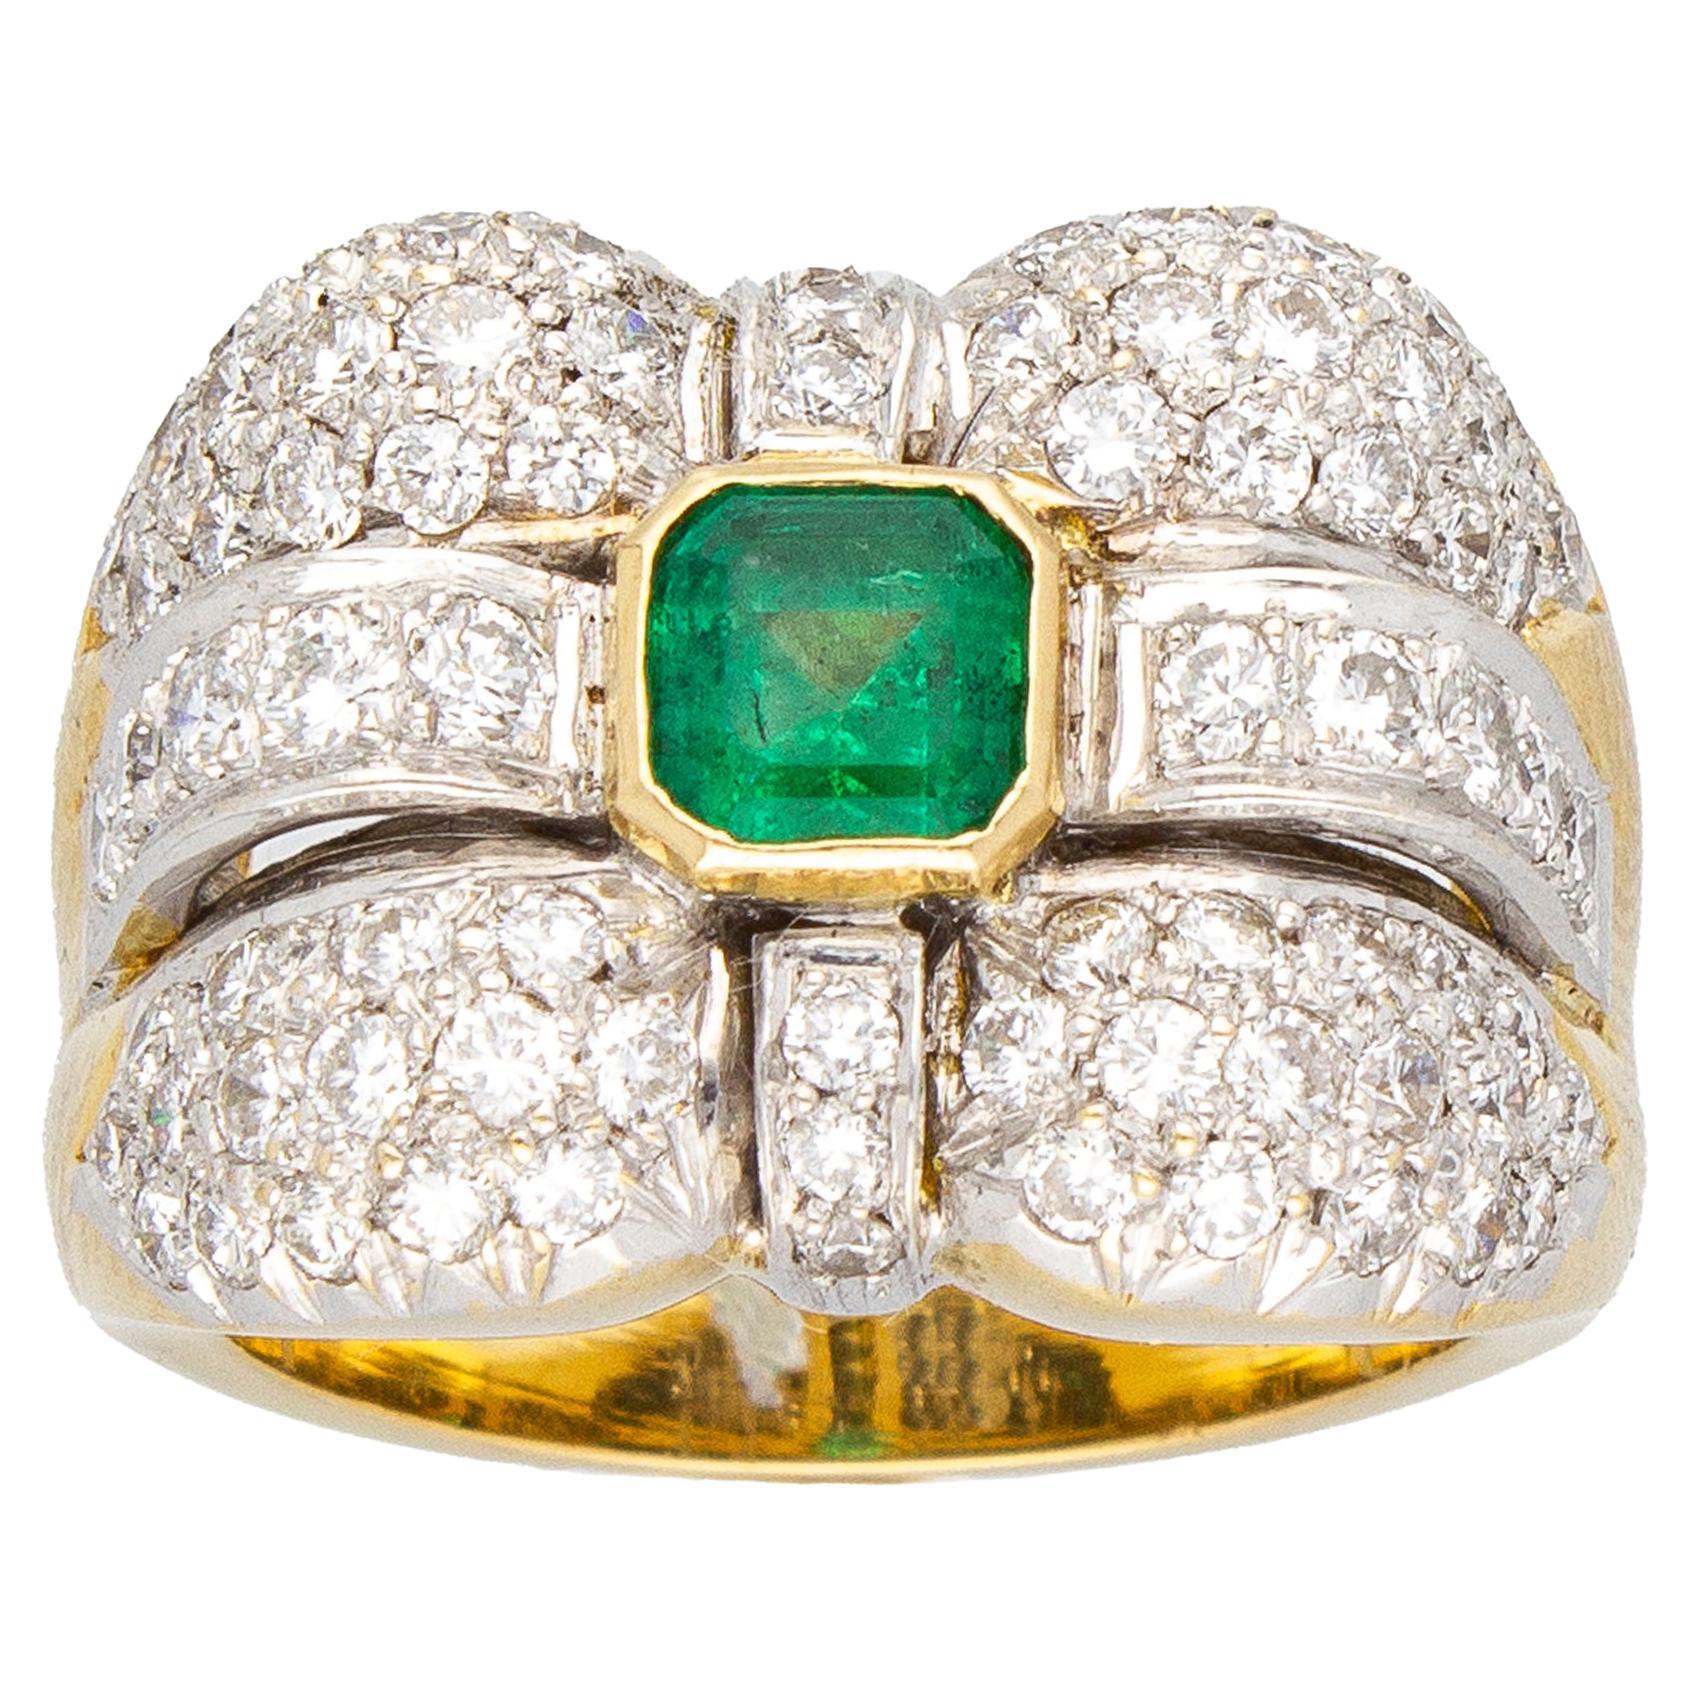 Emerald 0.70 ct, Diamonds 1.60 ct. Contemporary Band Ring.18 Kt Gold. Made Italy For Sale